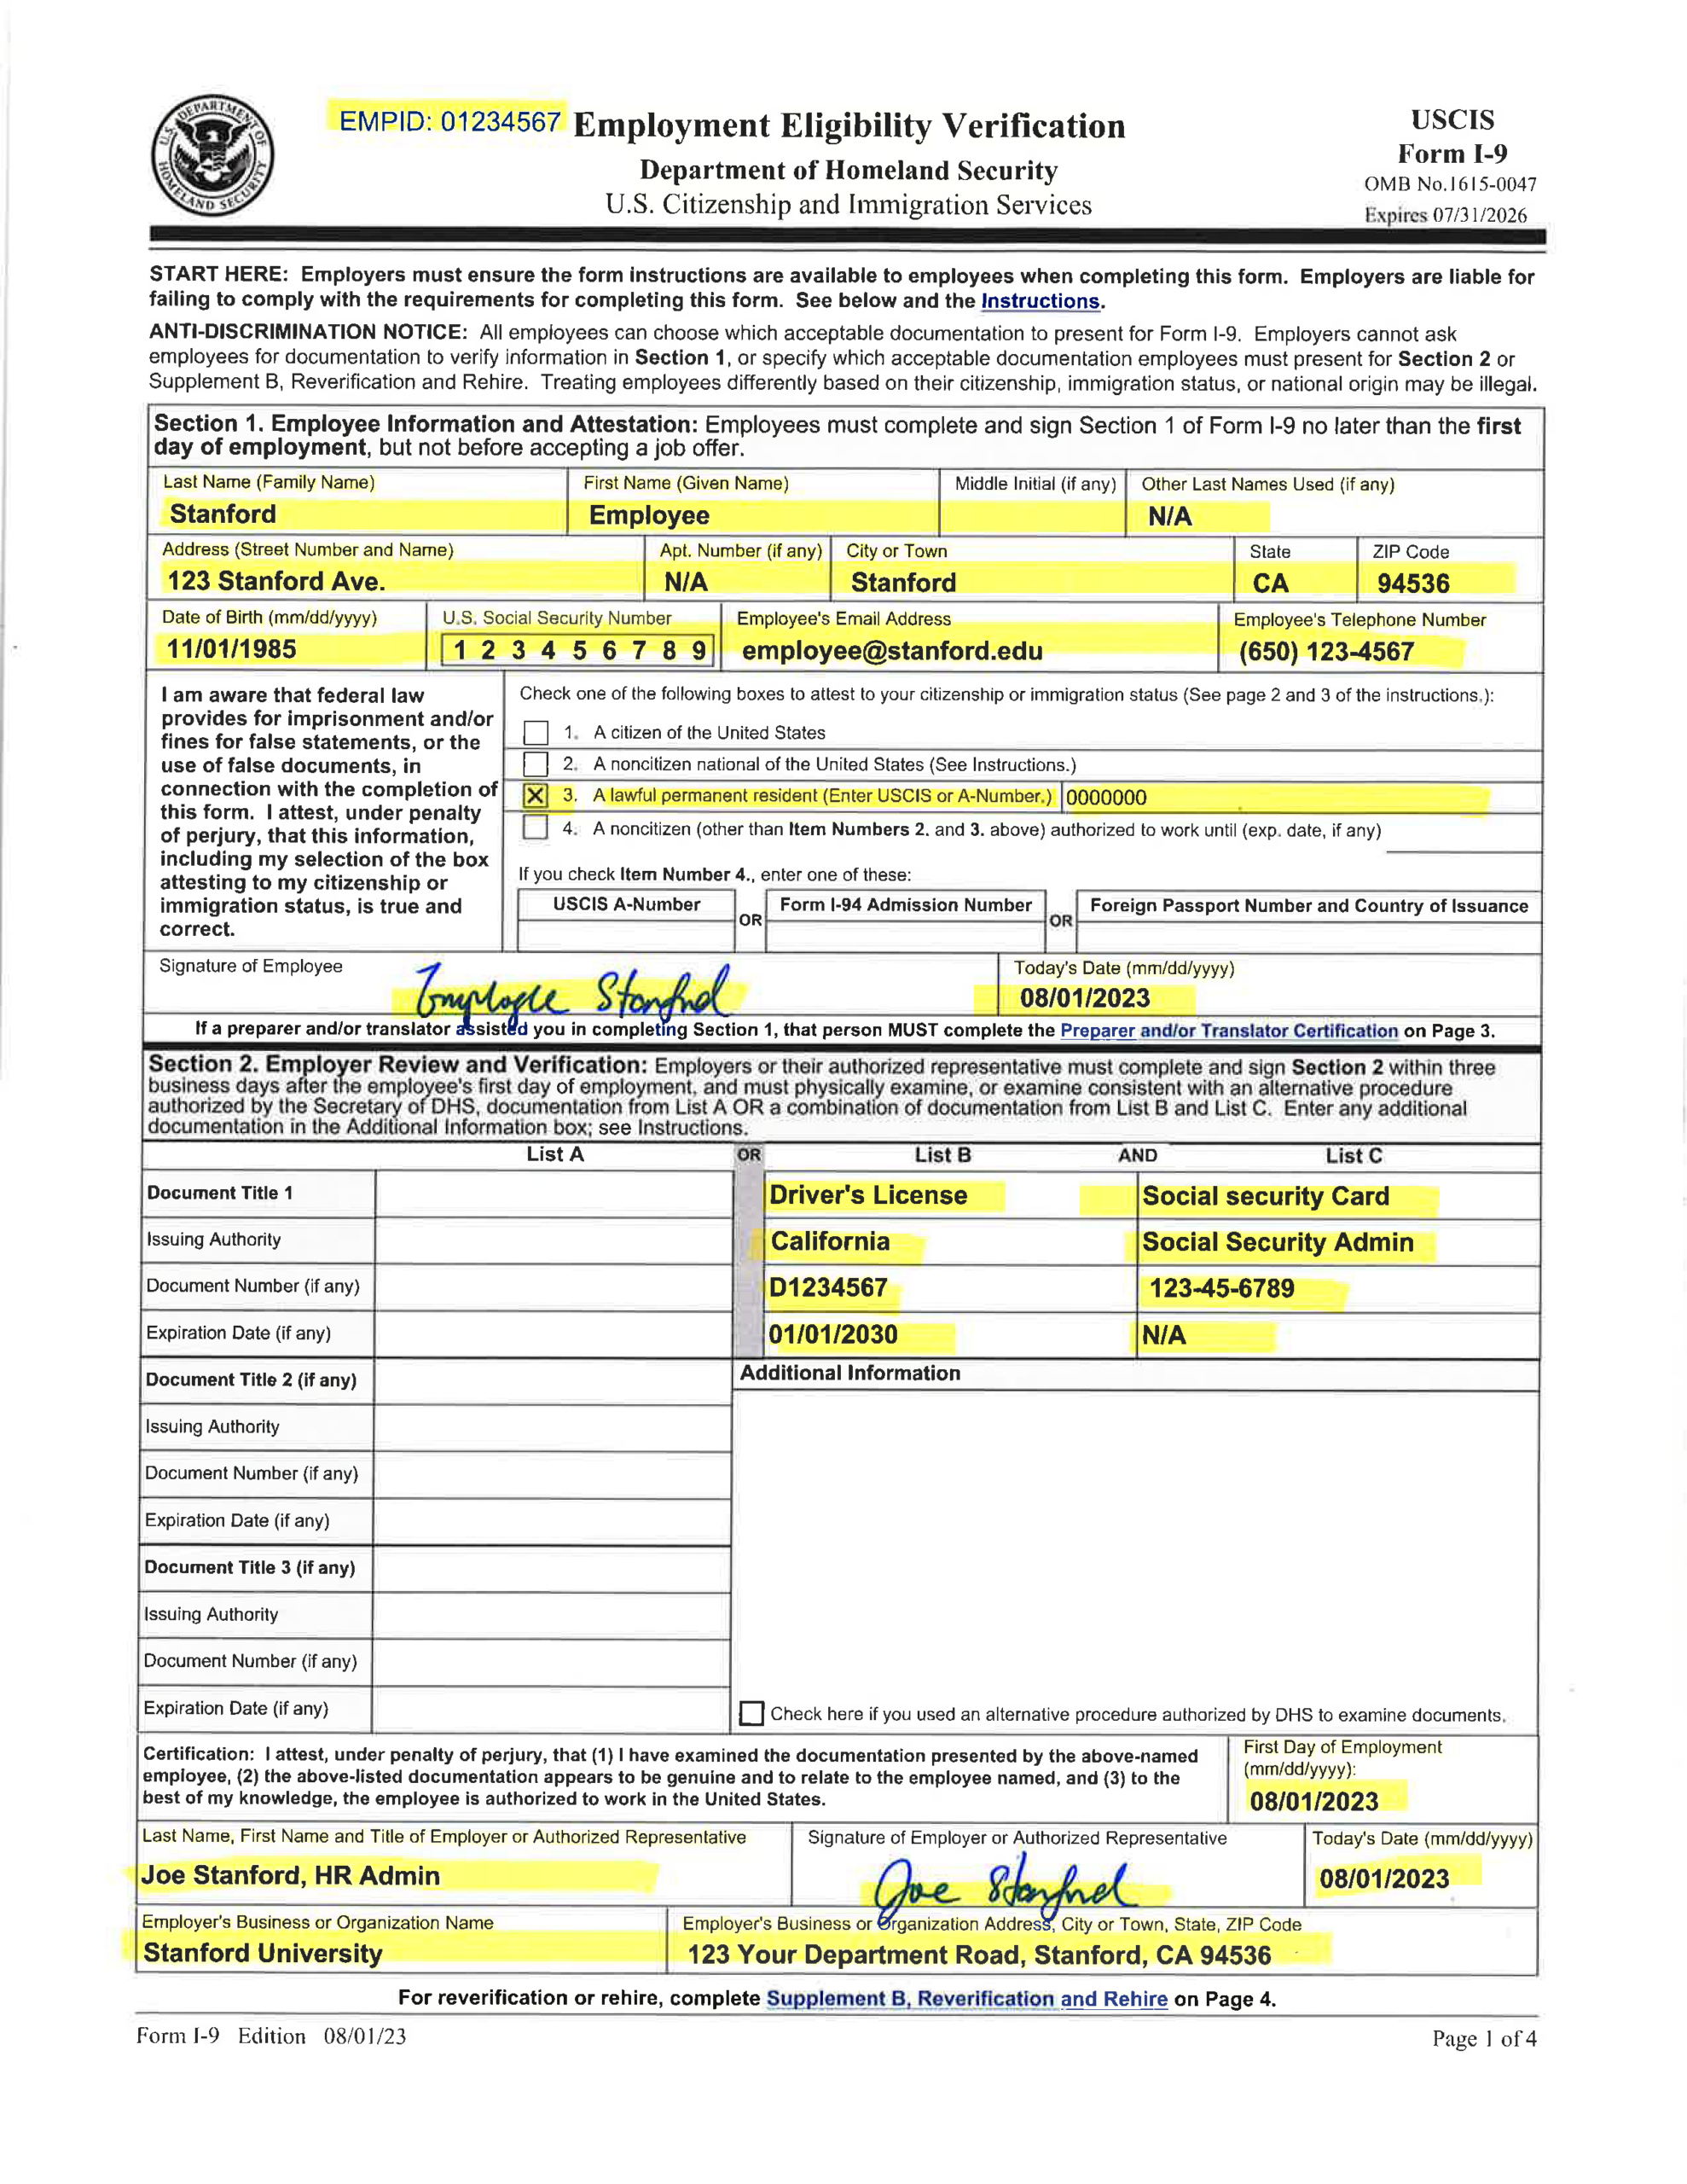 Examples Of Completed Form I-9 For Stanford with regard to I9 Form From Uscis